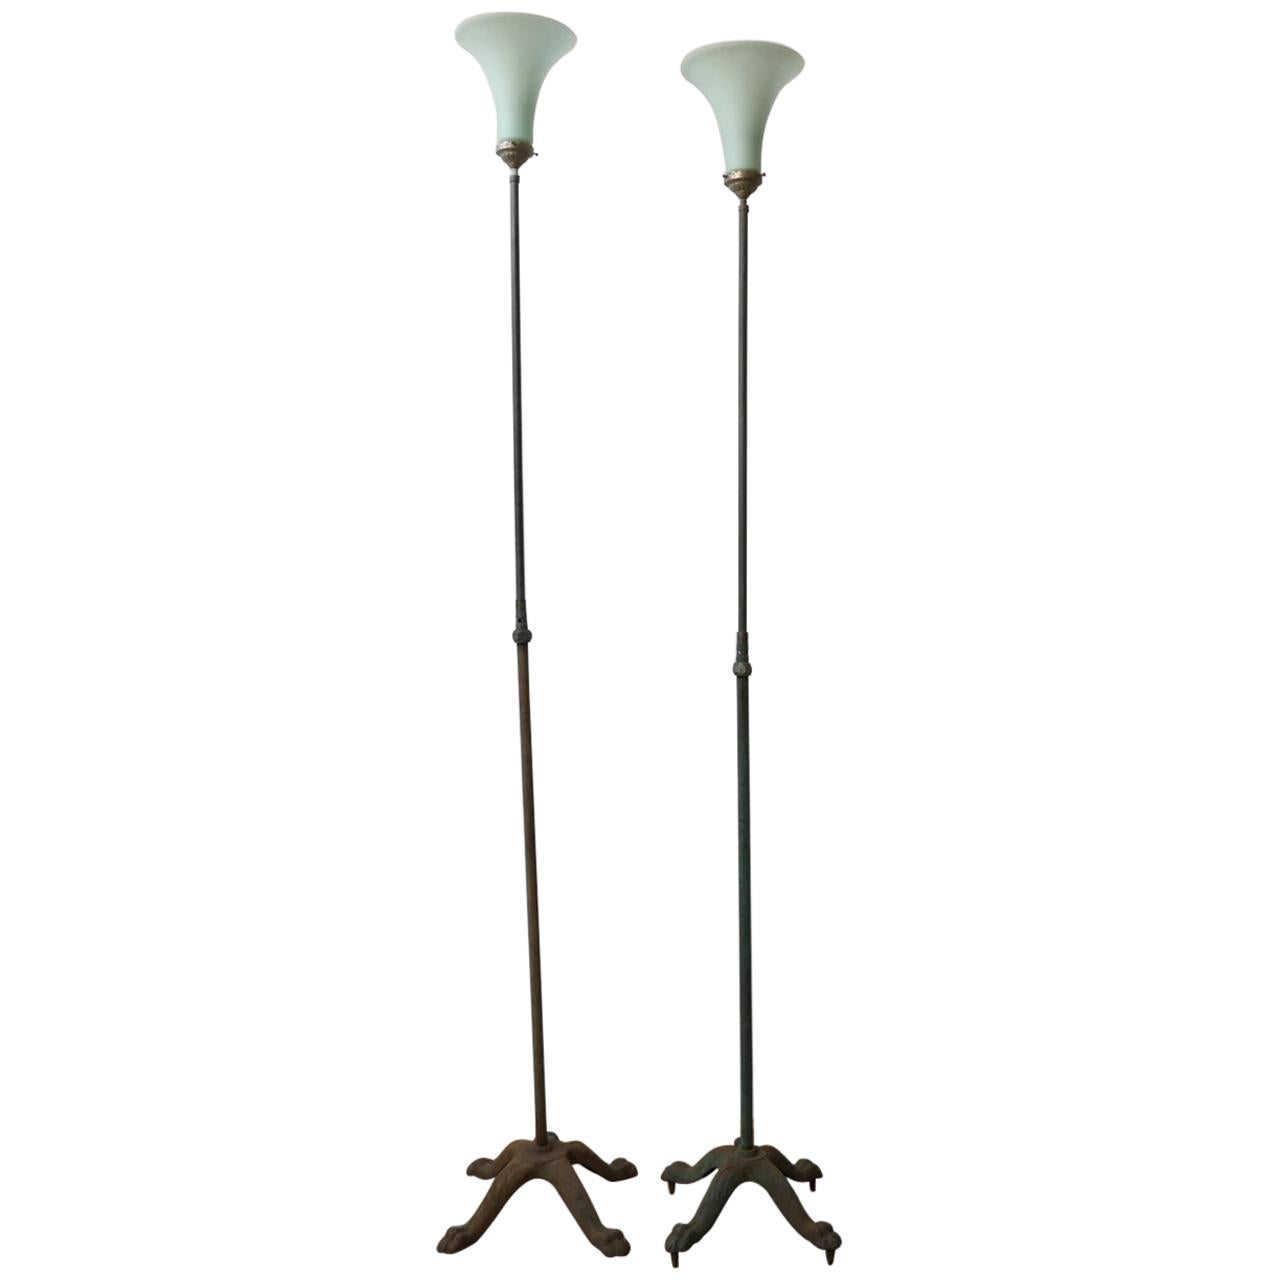 Antique Dutch Uplighter Glass Shade Floor Lamps '2' For Sale